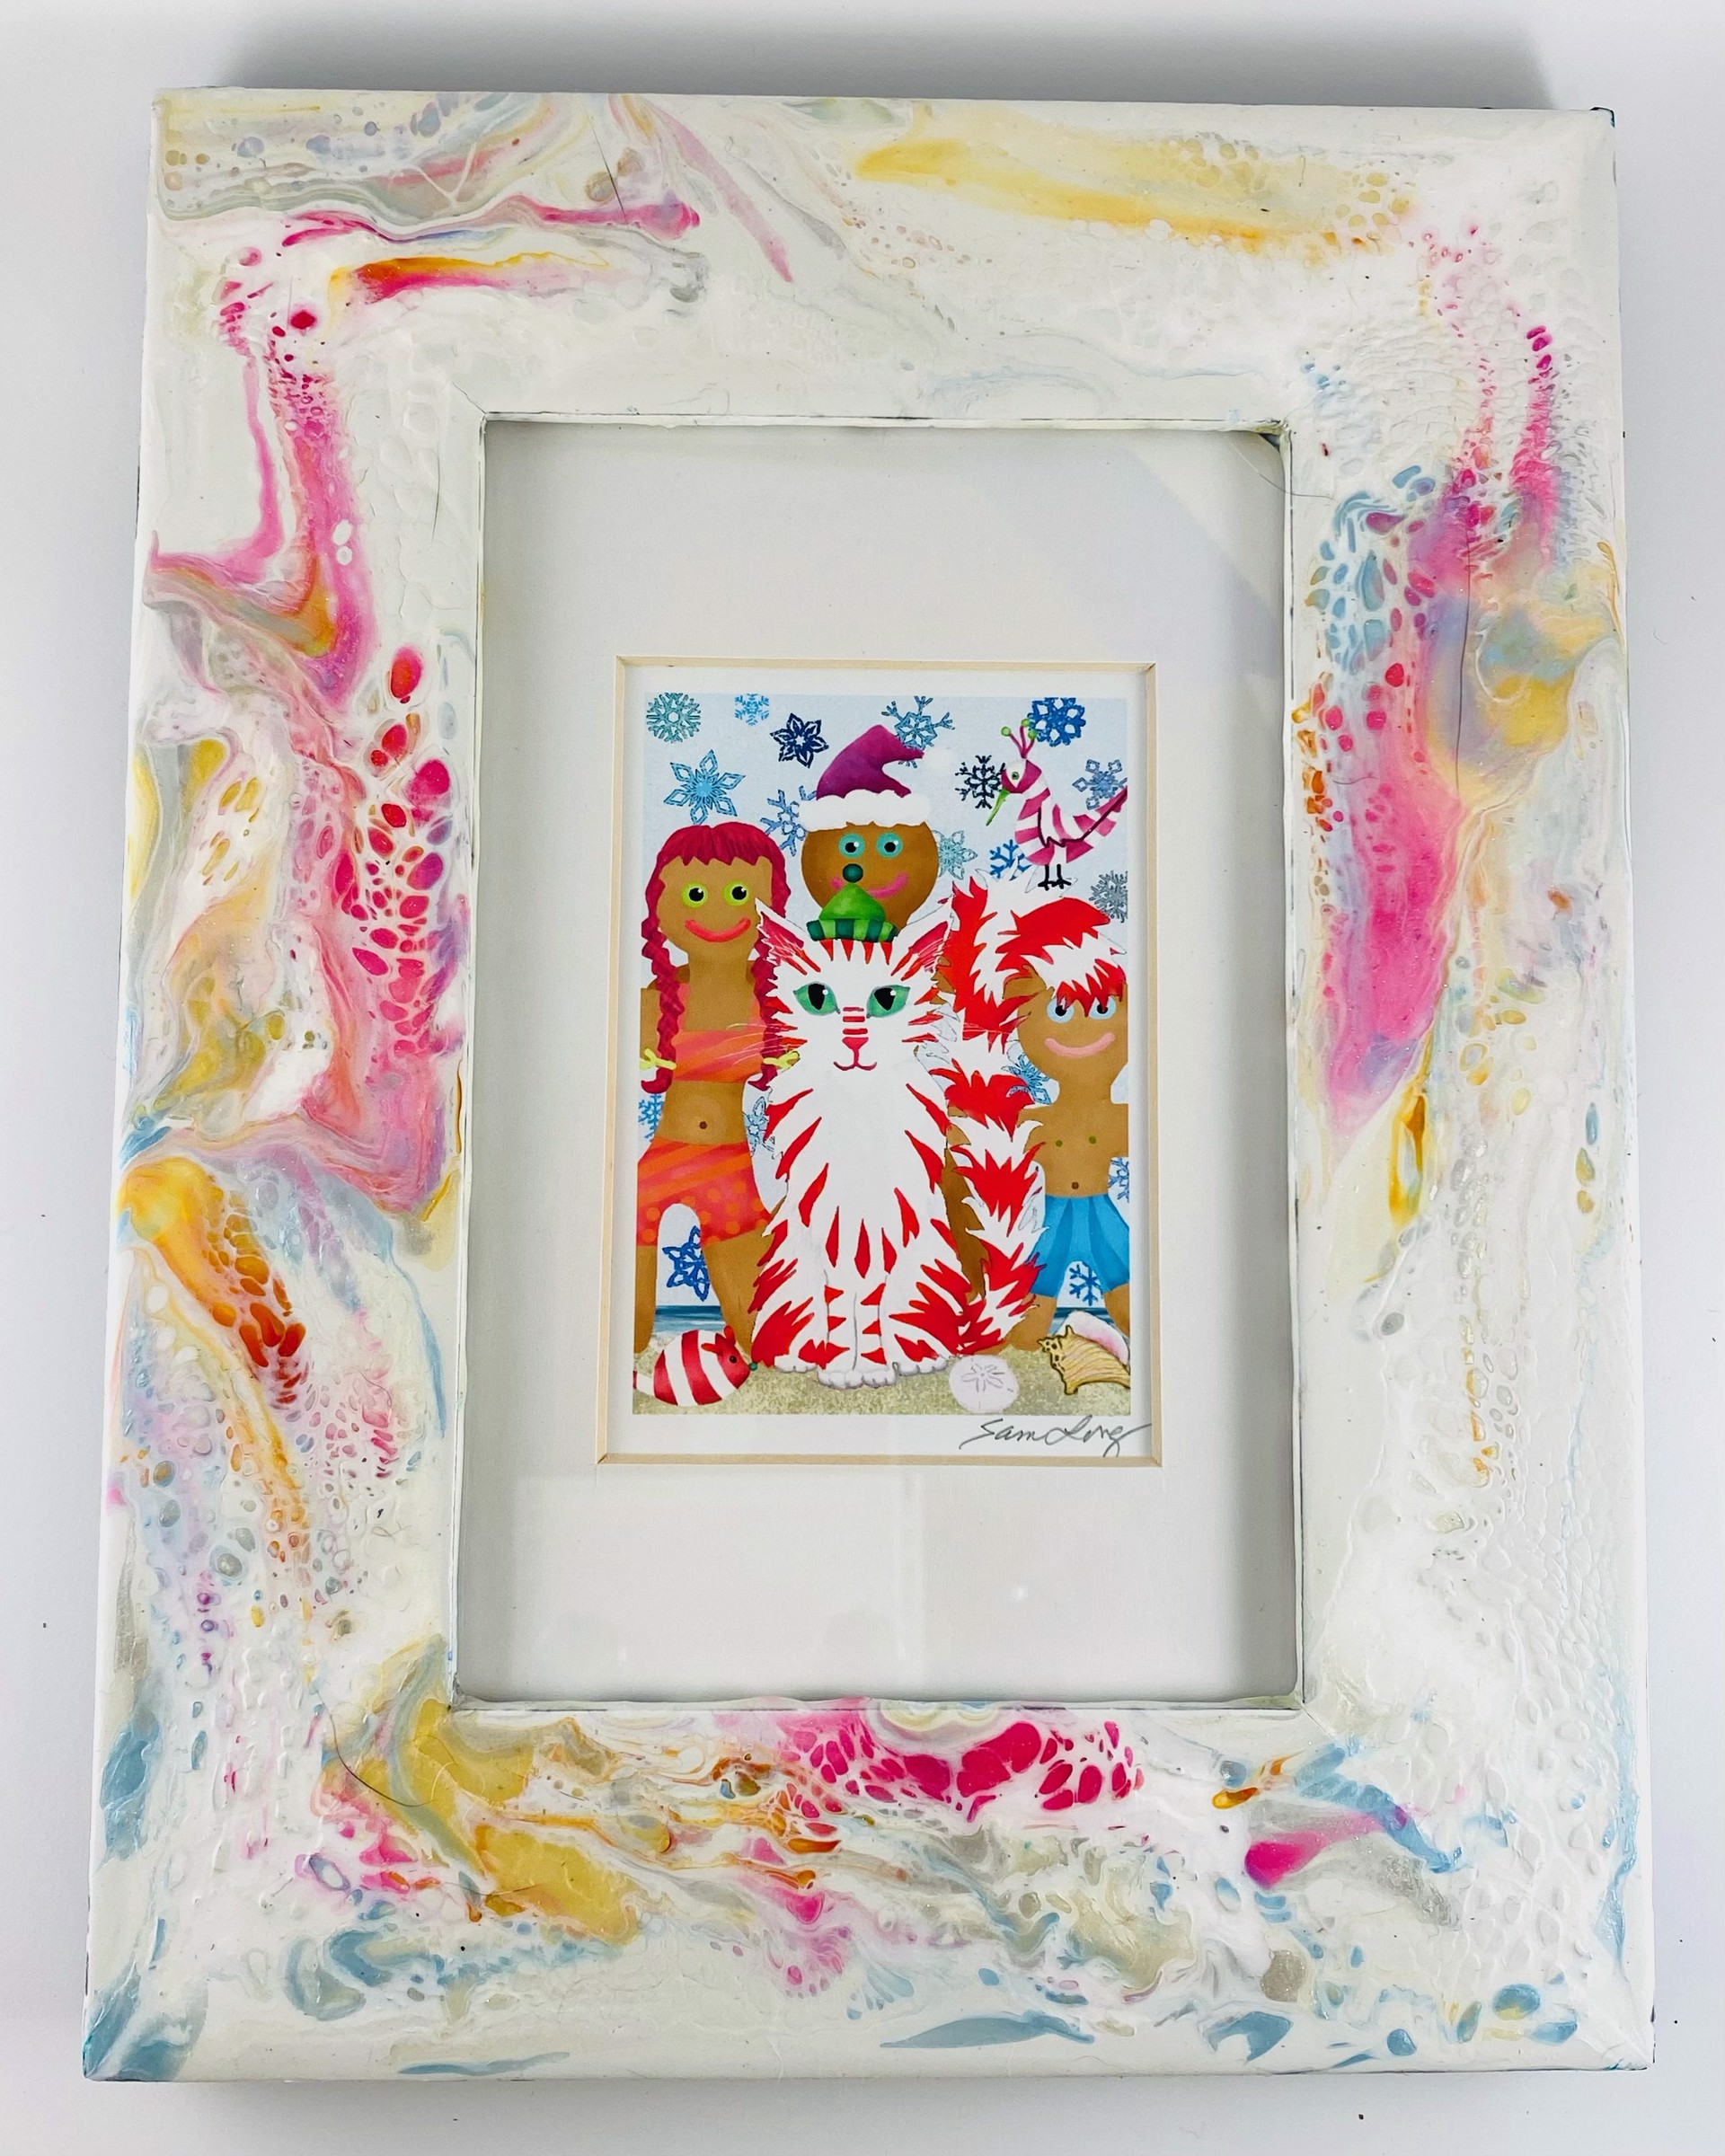 SAM21-20 Print- Hand Painted Frame, Matted, Under Glass by Samantha Long